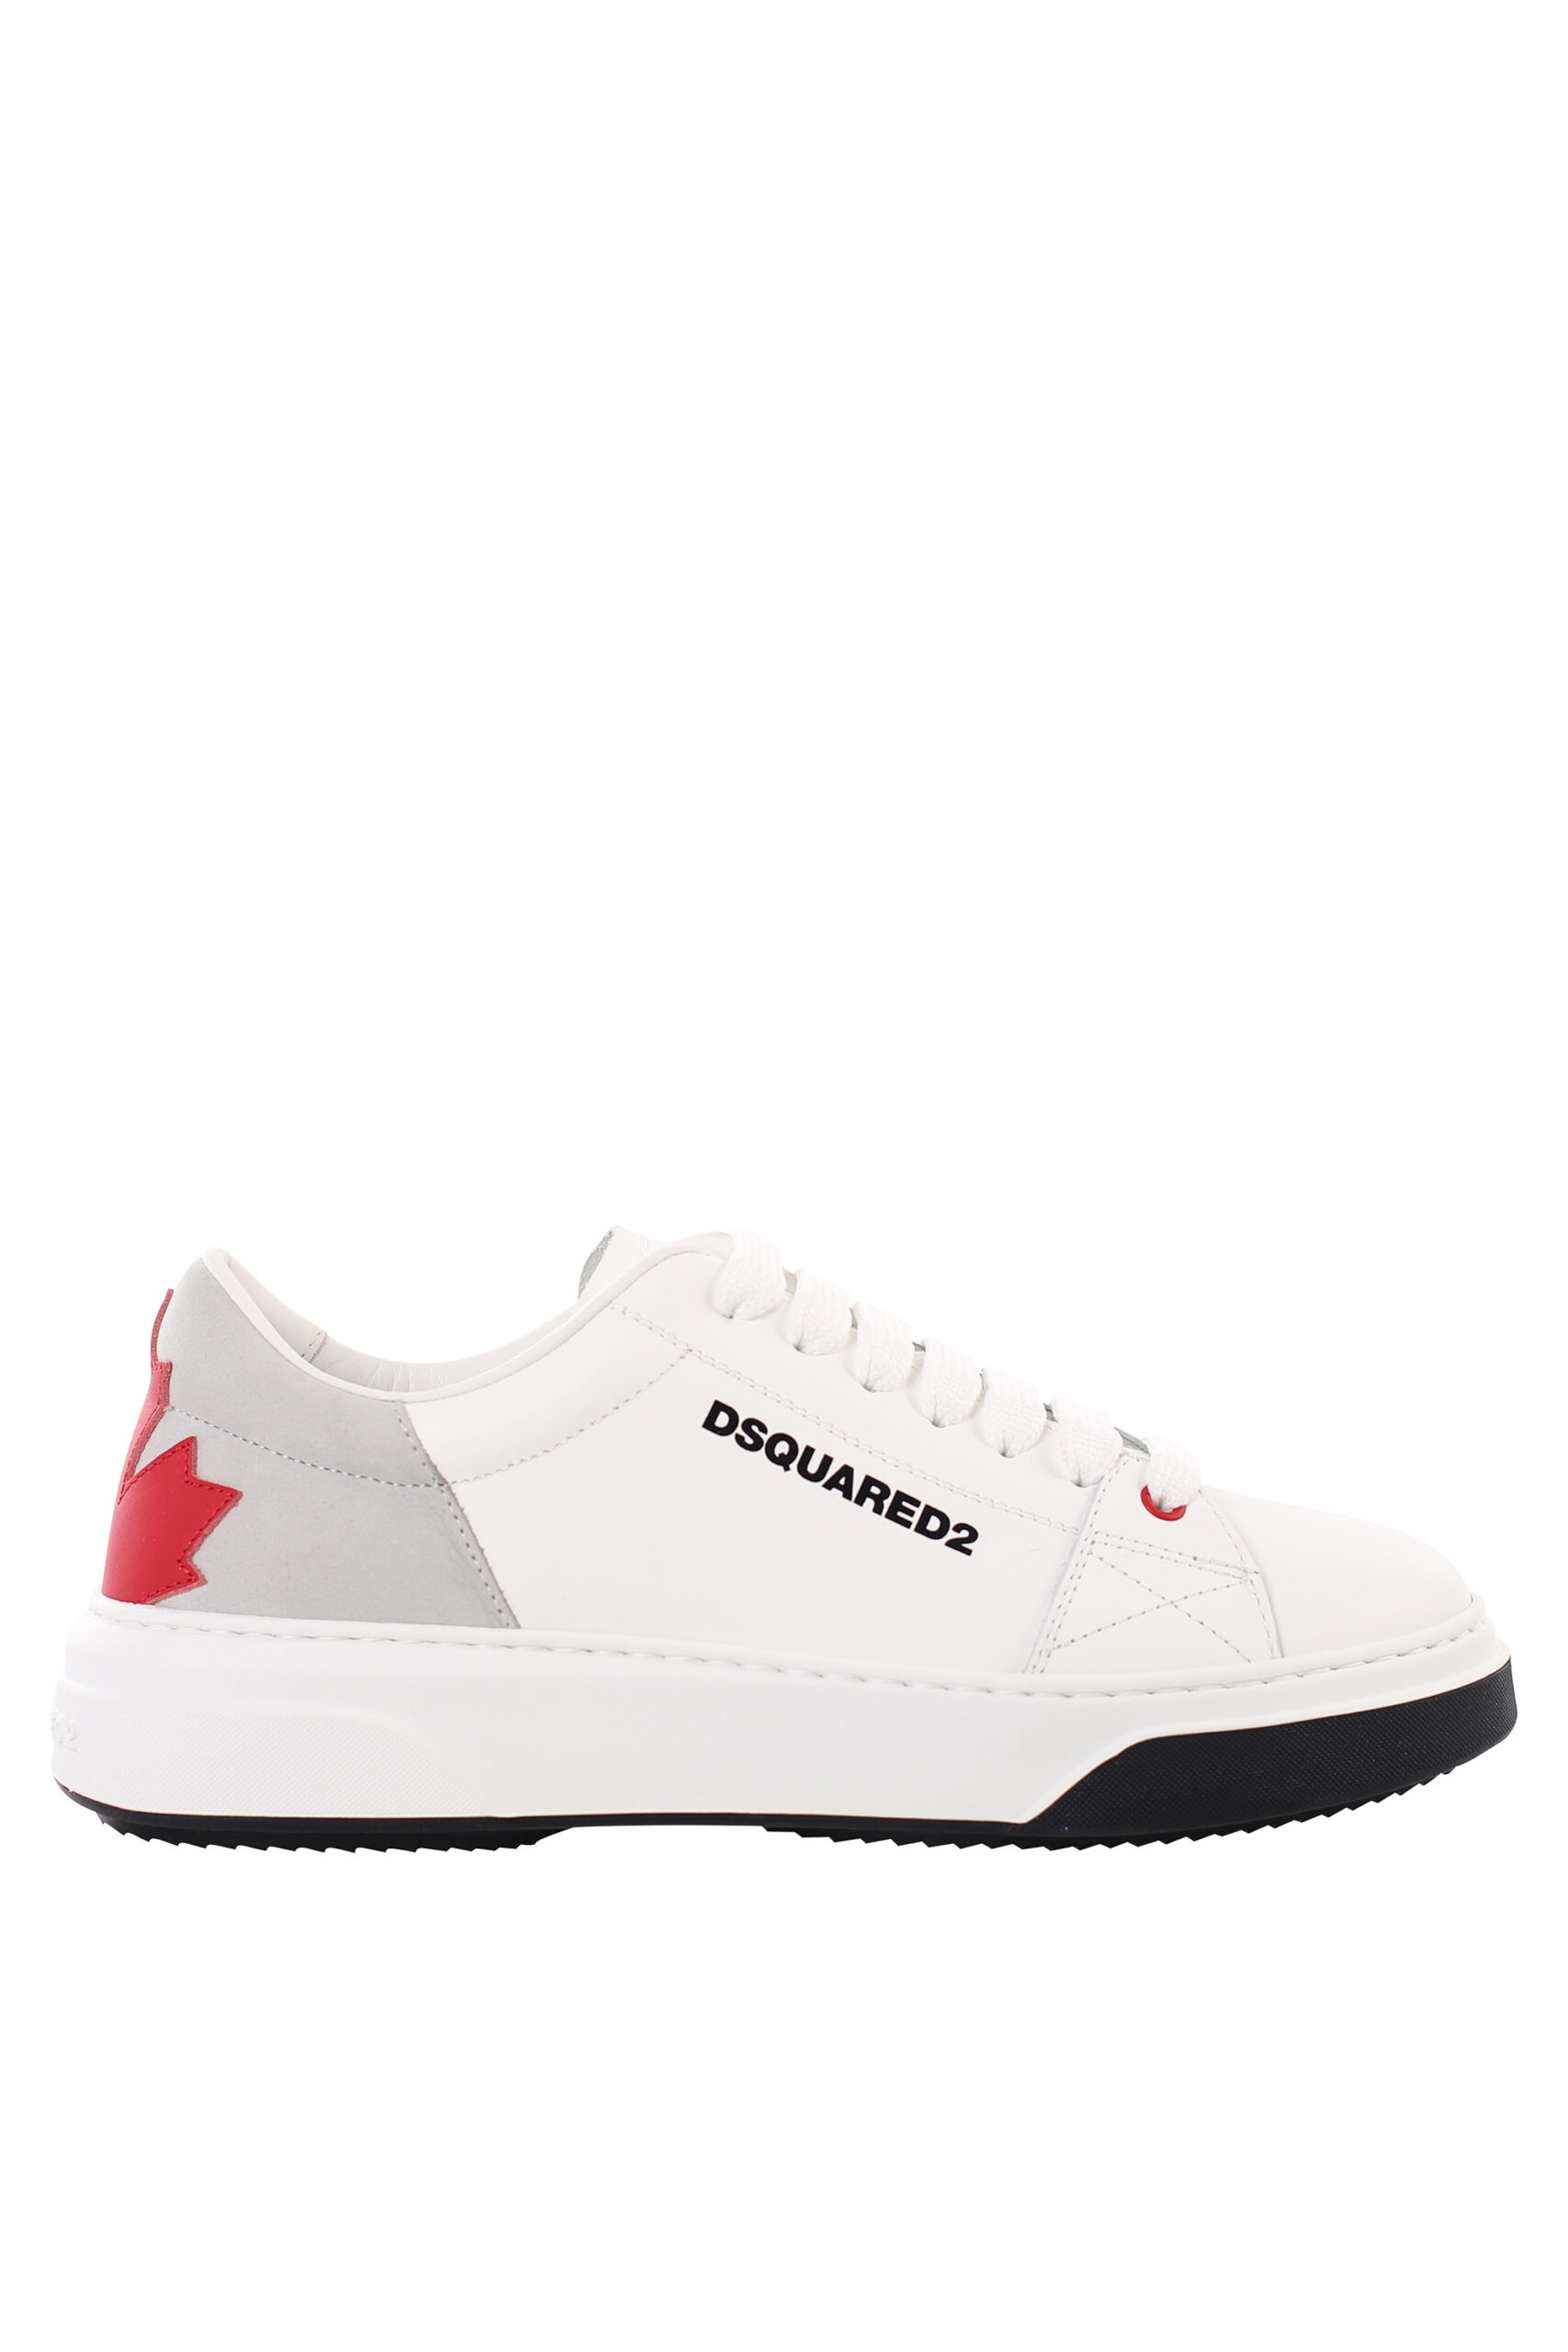 Dsquared2 Low-Top Sneakers LEGEND calfskin online shopping -  mybudapester.com